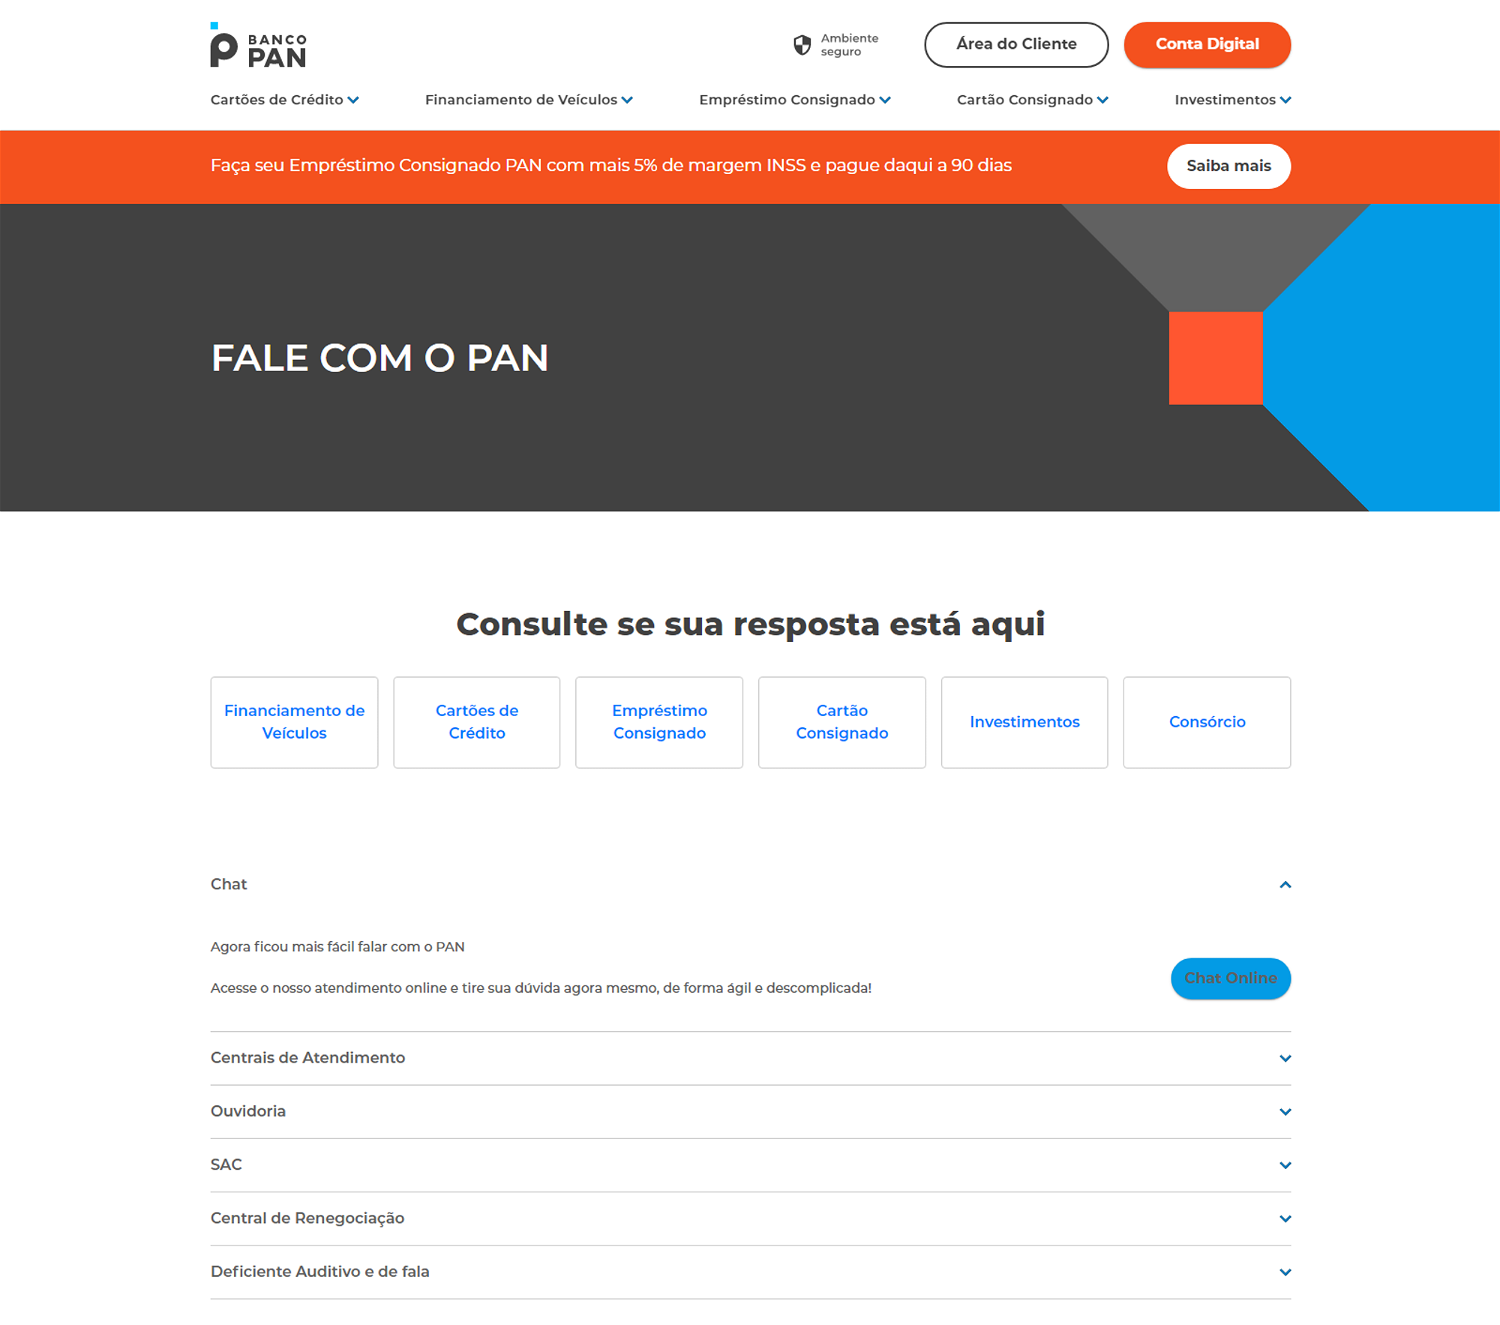 Banco Pan's Help Centre web page is the easiest to navigate